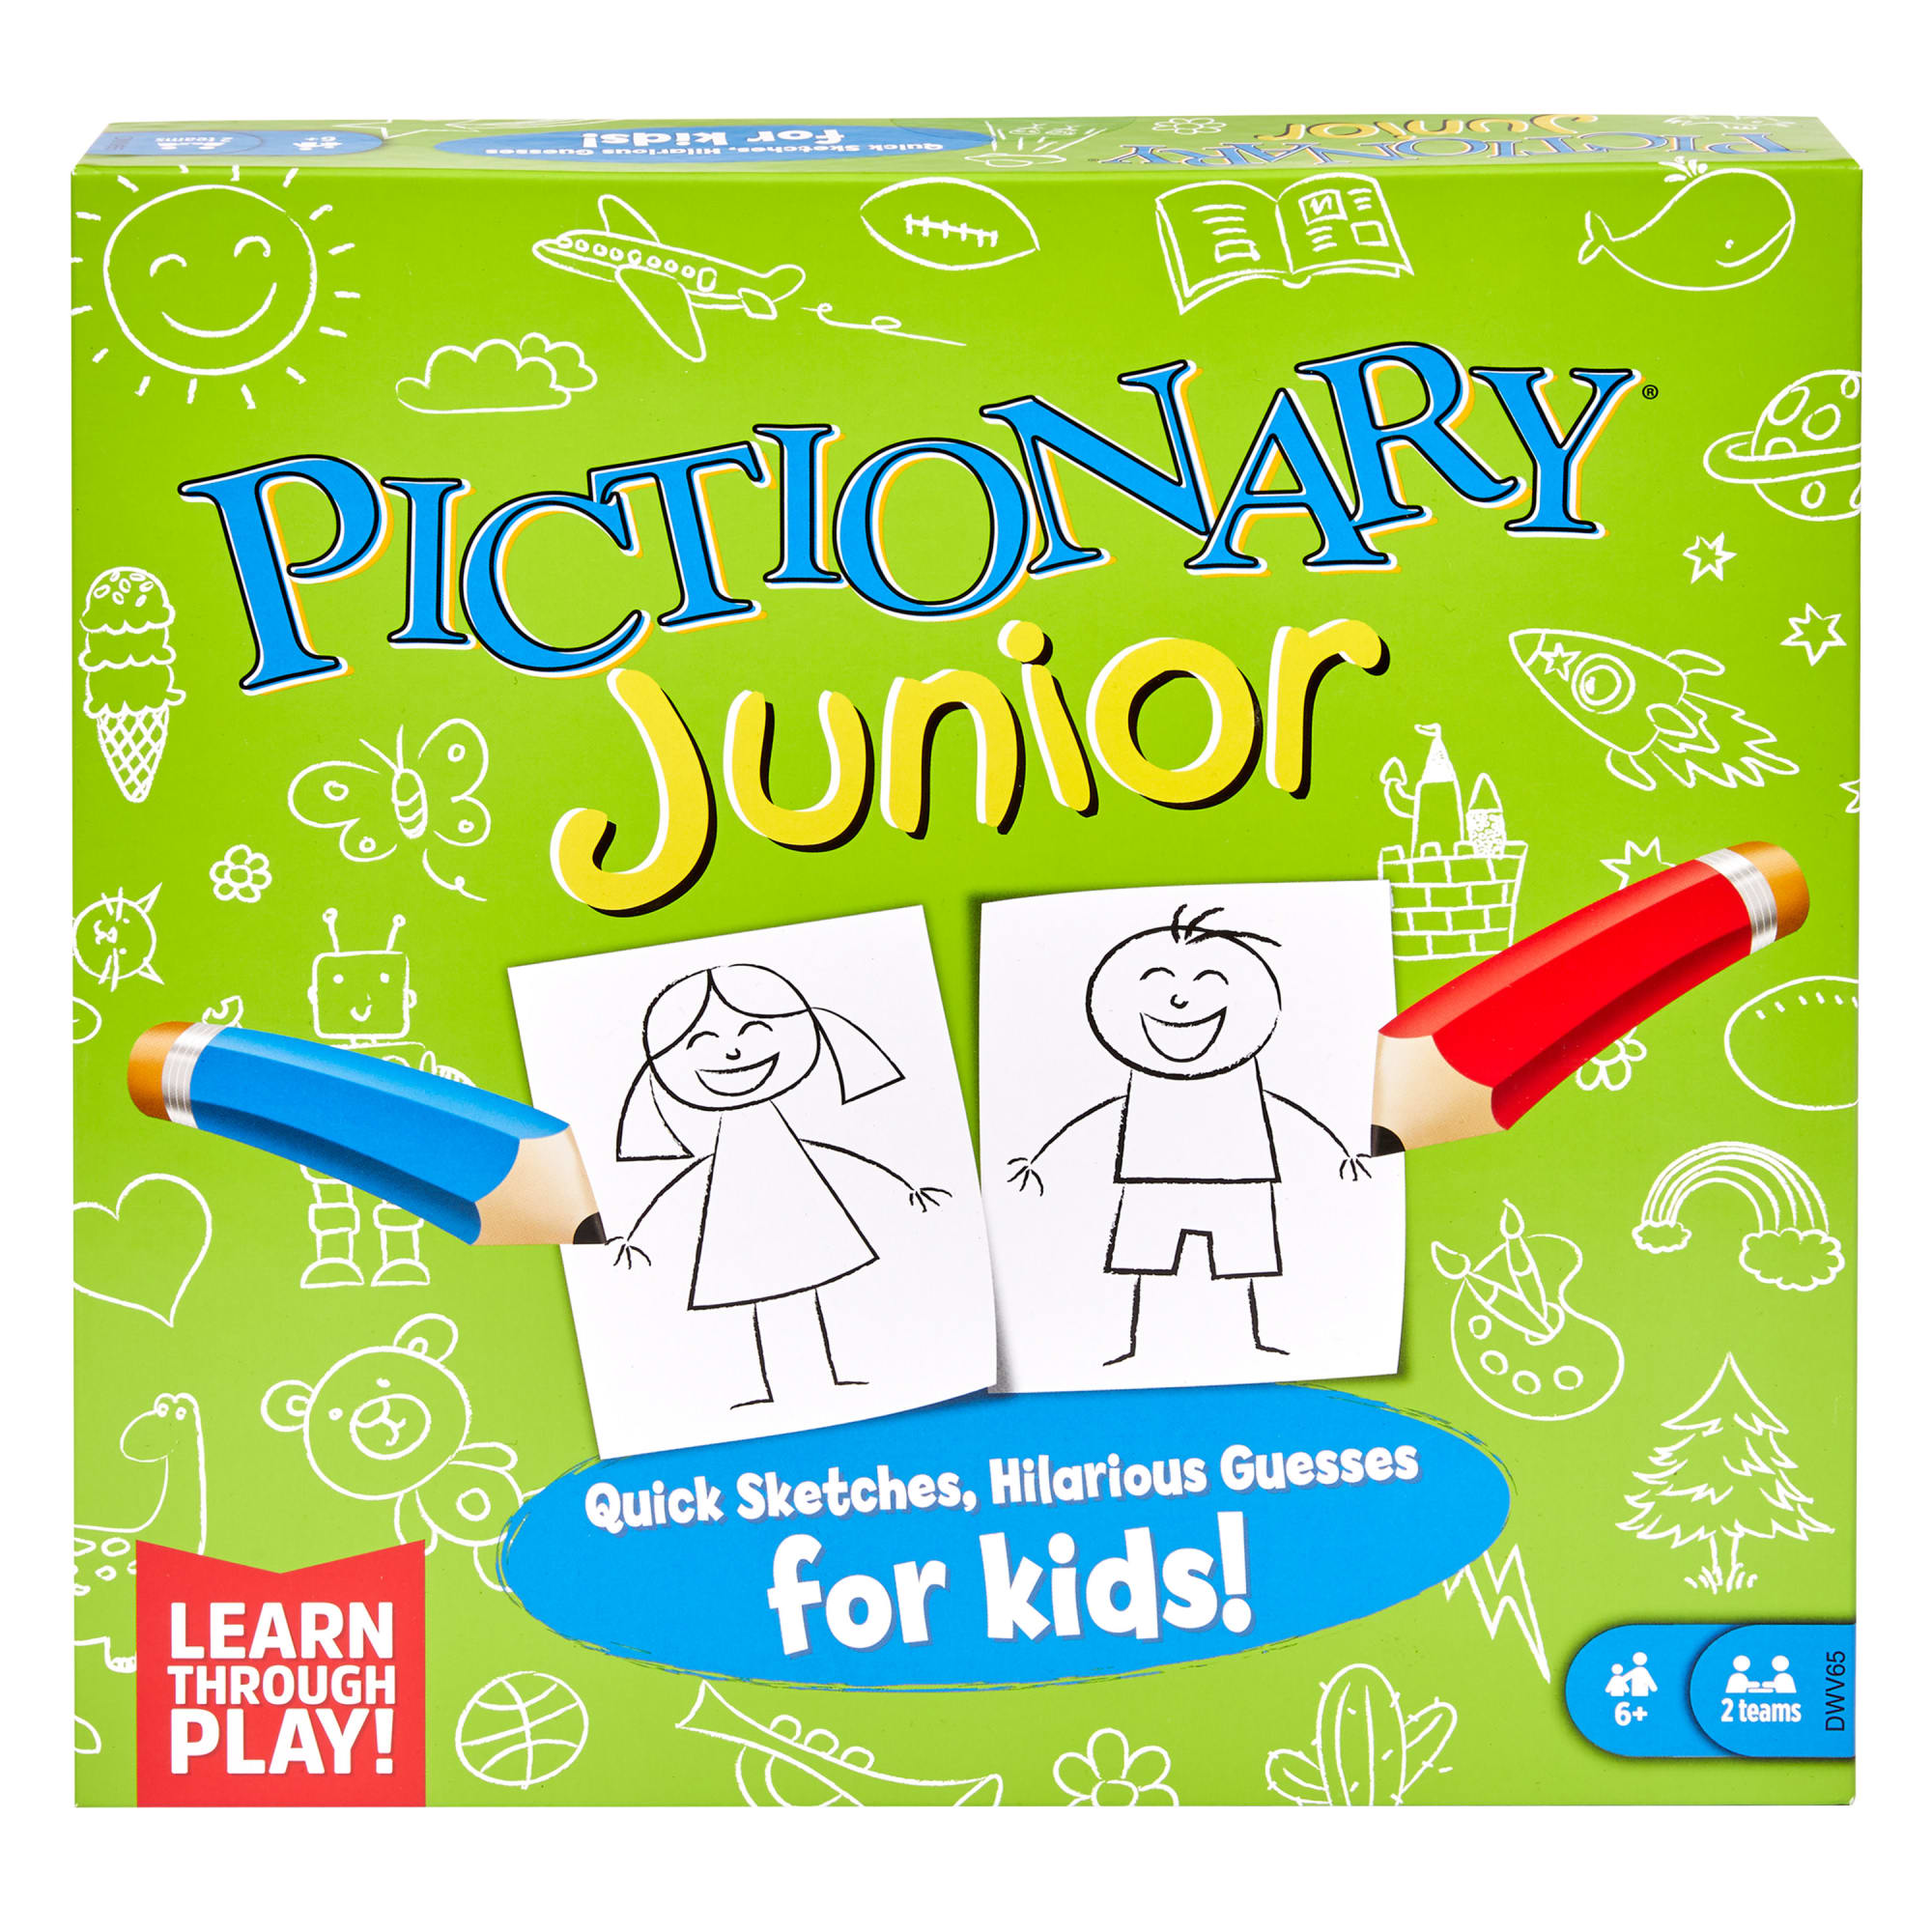 How to Play Pictionary? The Definitive Step by Step Guide